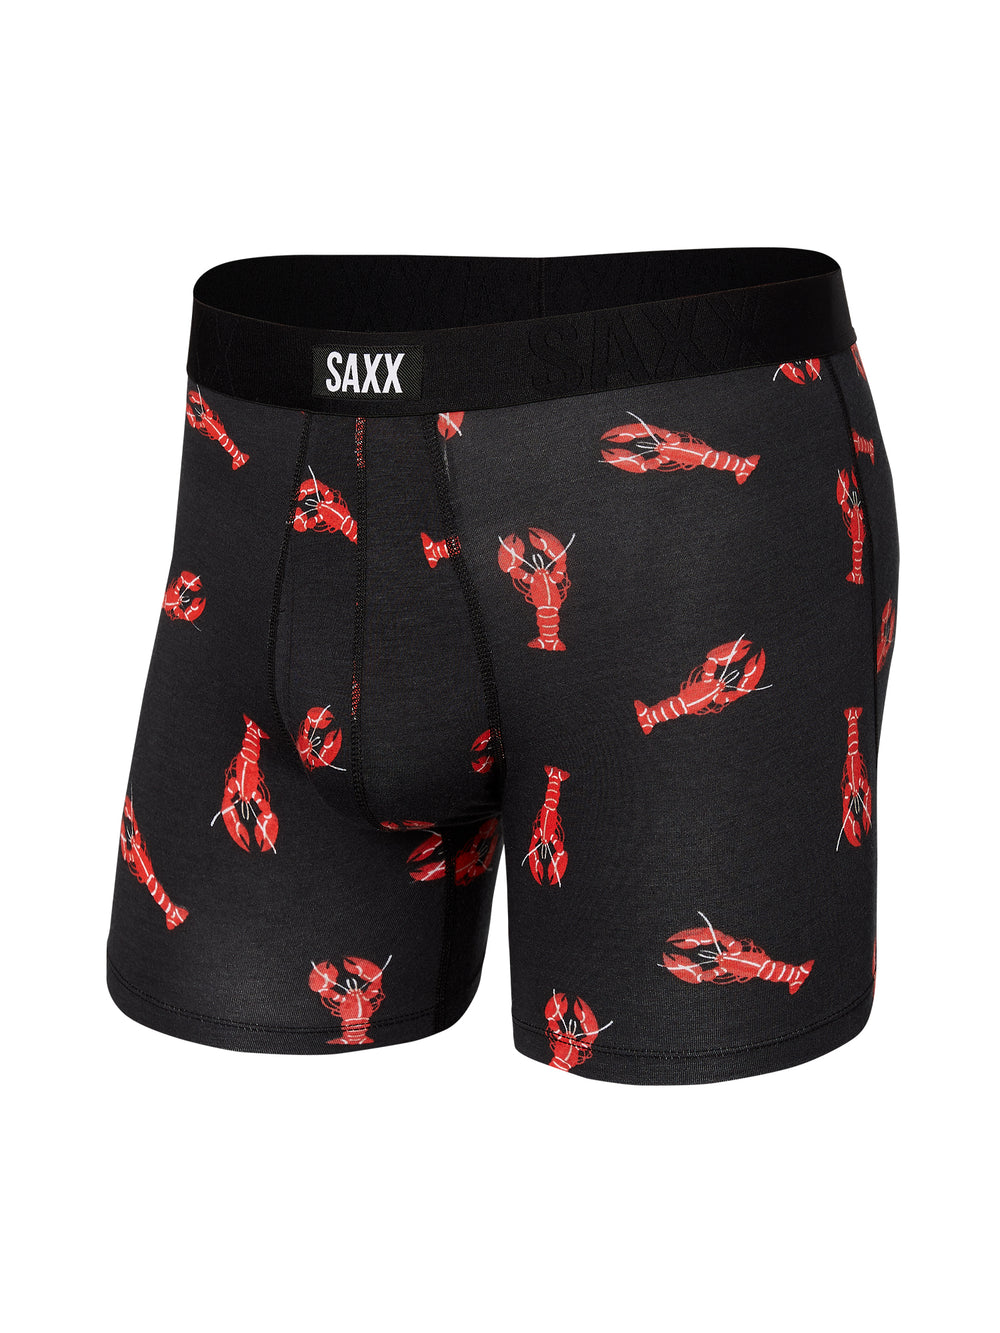 SAXX UNDERCOVER BOXER BRIEF - OH SNAP LOBSTER - DÉSTOCKAGE